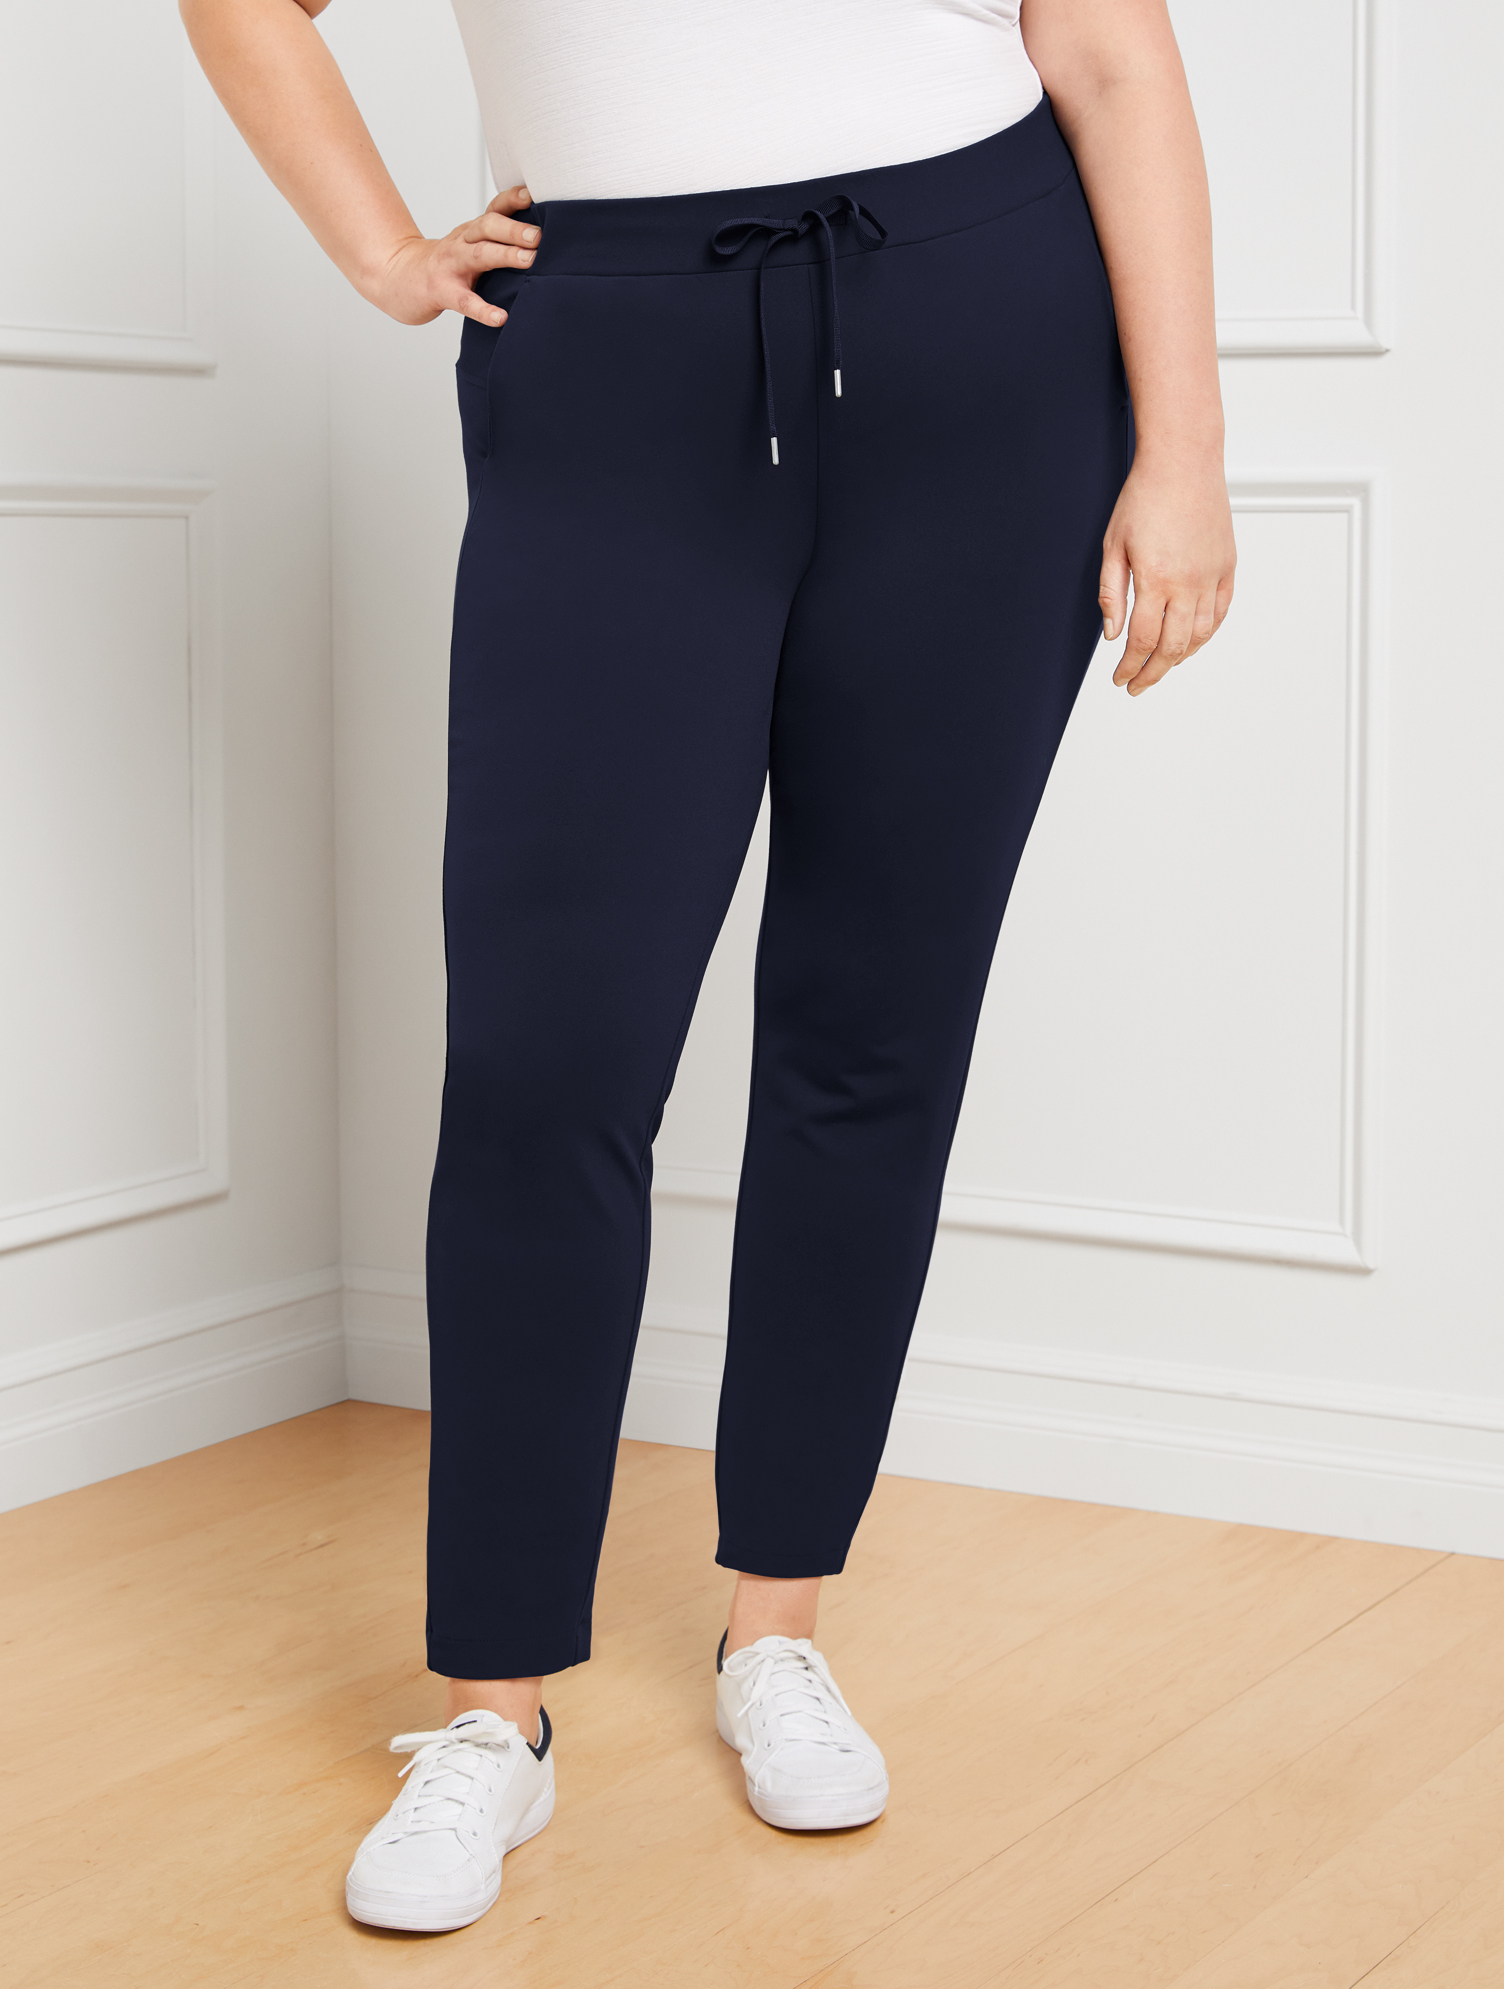 Talbots Out & About Stretch Jogger Pants - Blue - X